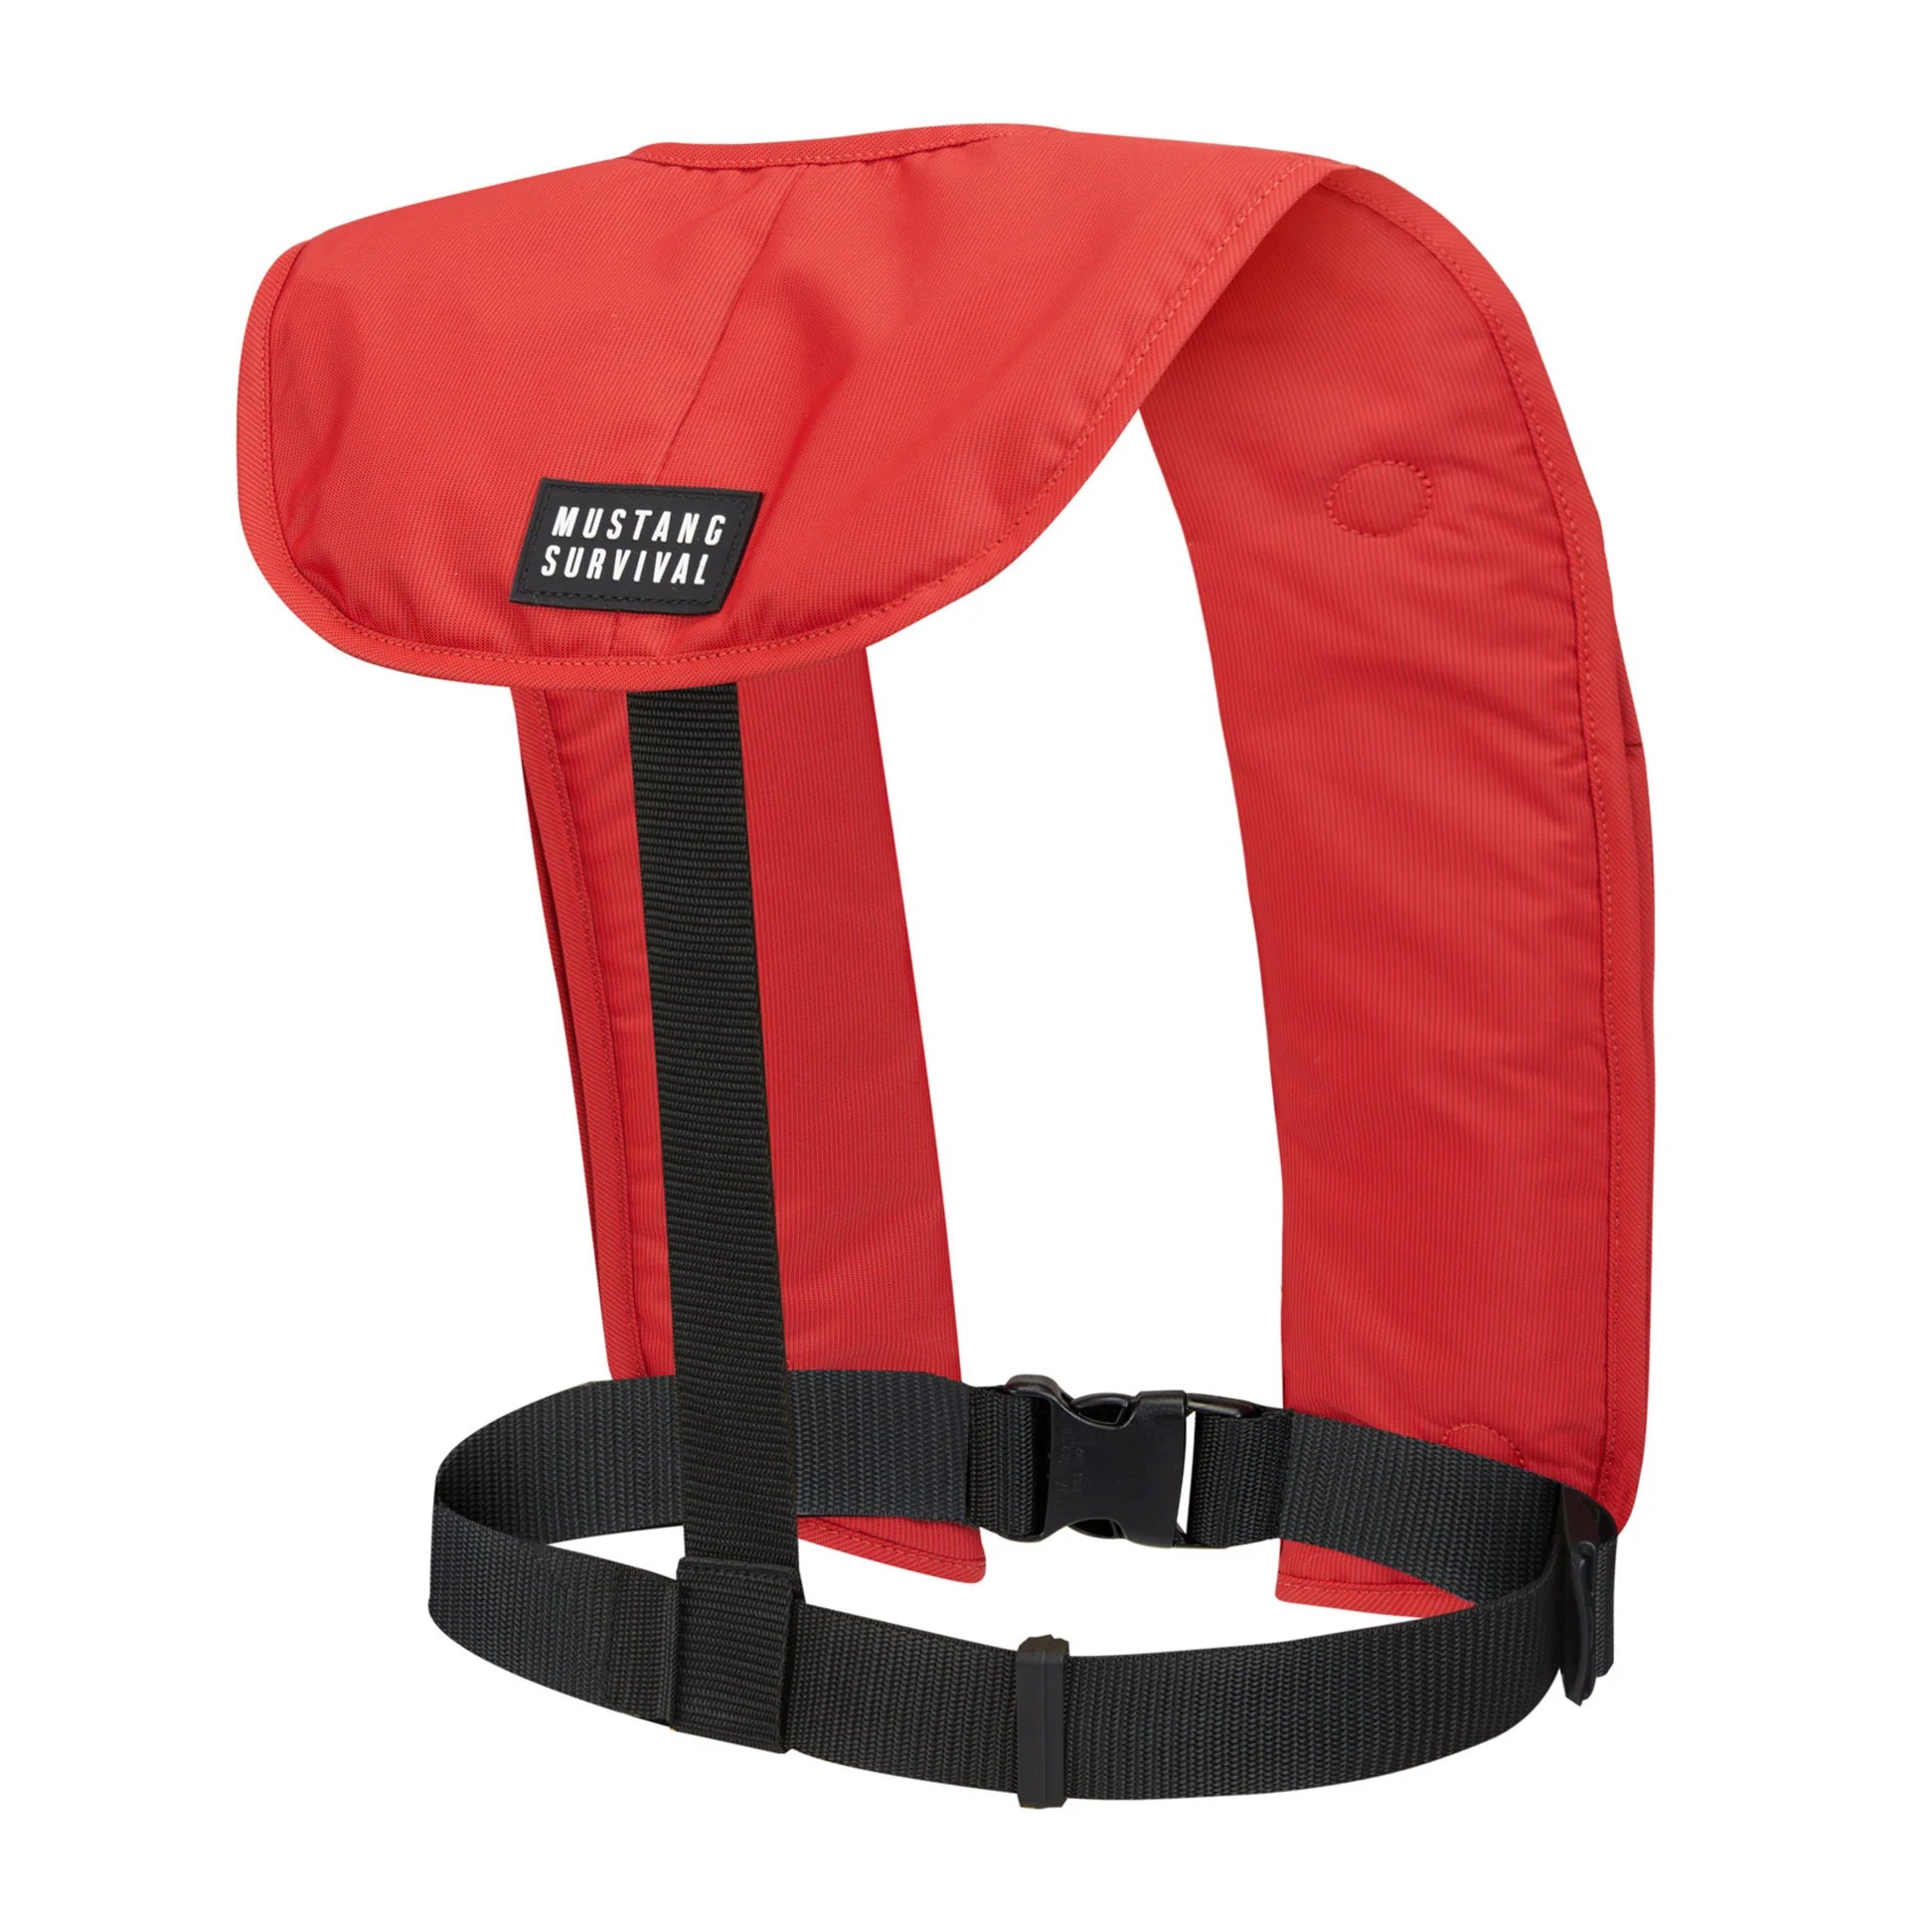 Mustang Survival MIT 70 Manual Inflatable PFD red